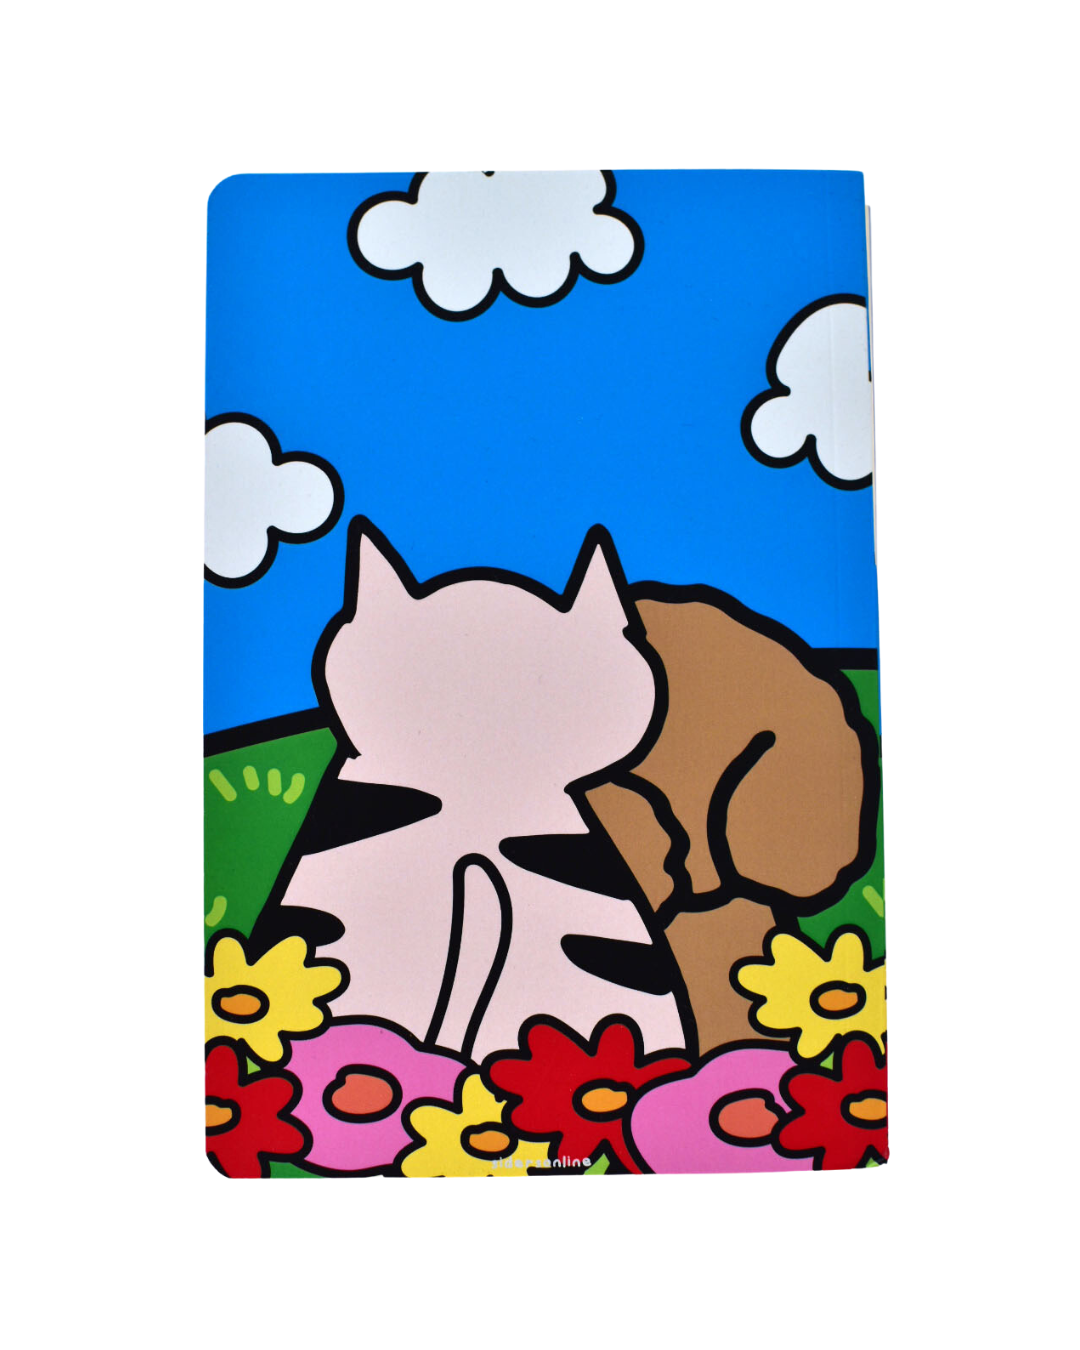 Have a Pawsome Day Softcover A5 Notebook